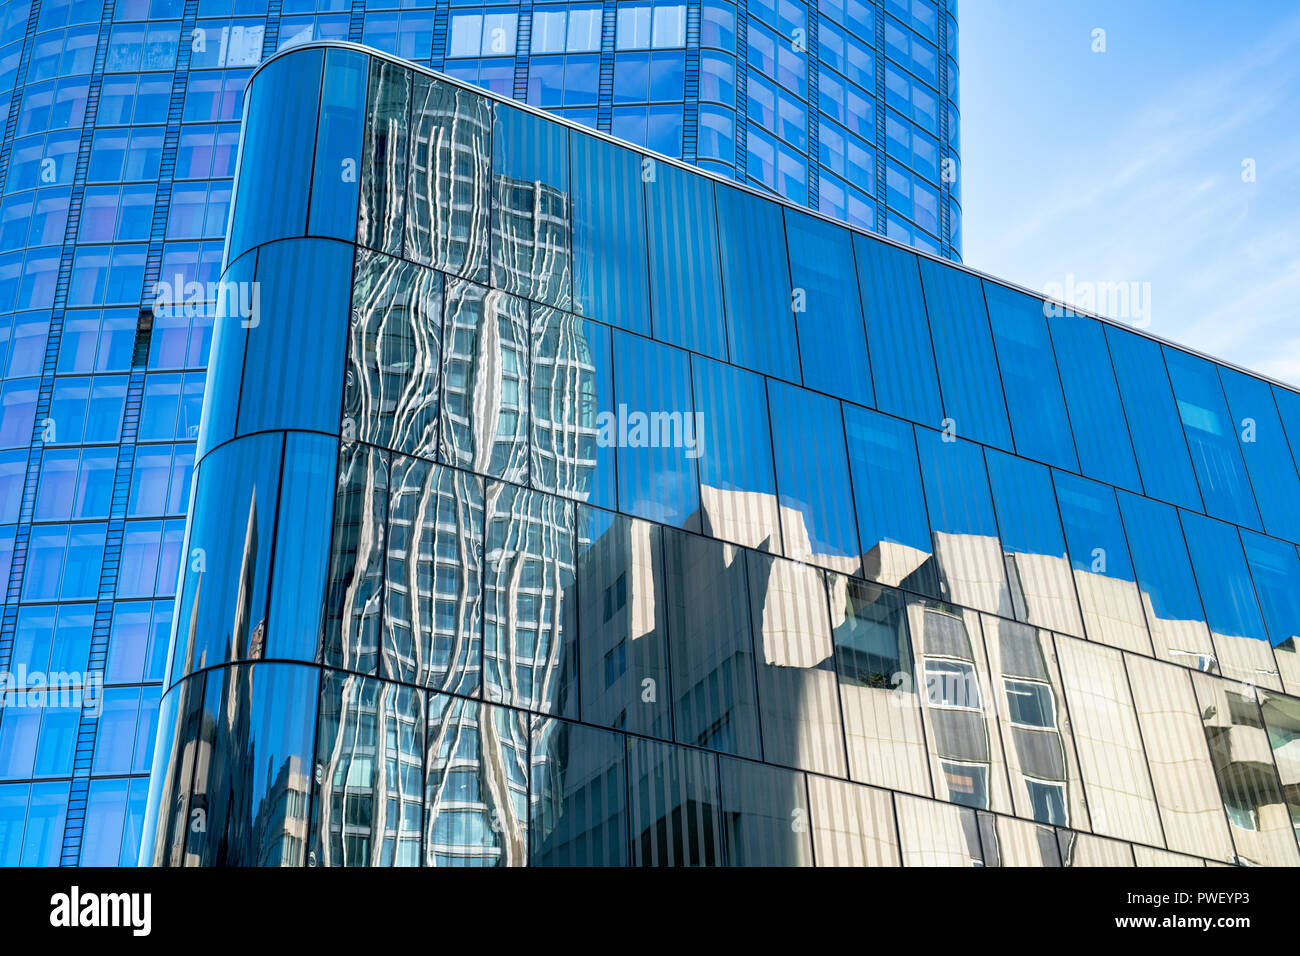 Glass Buildings London High Resolution Stock Photography and Images - Alamy